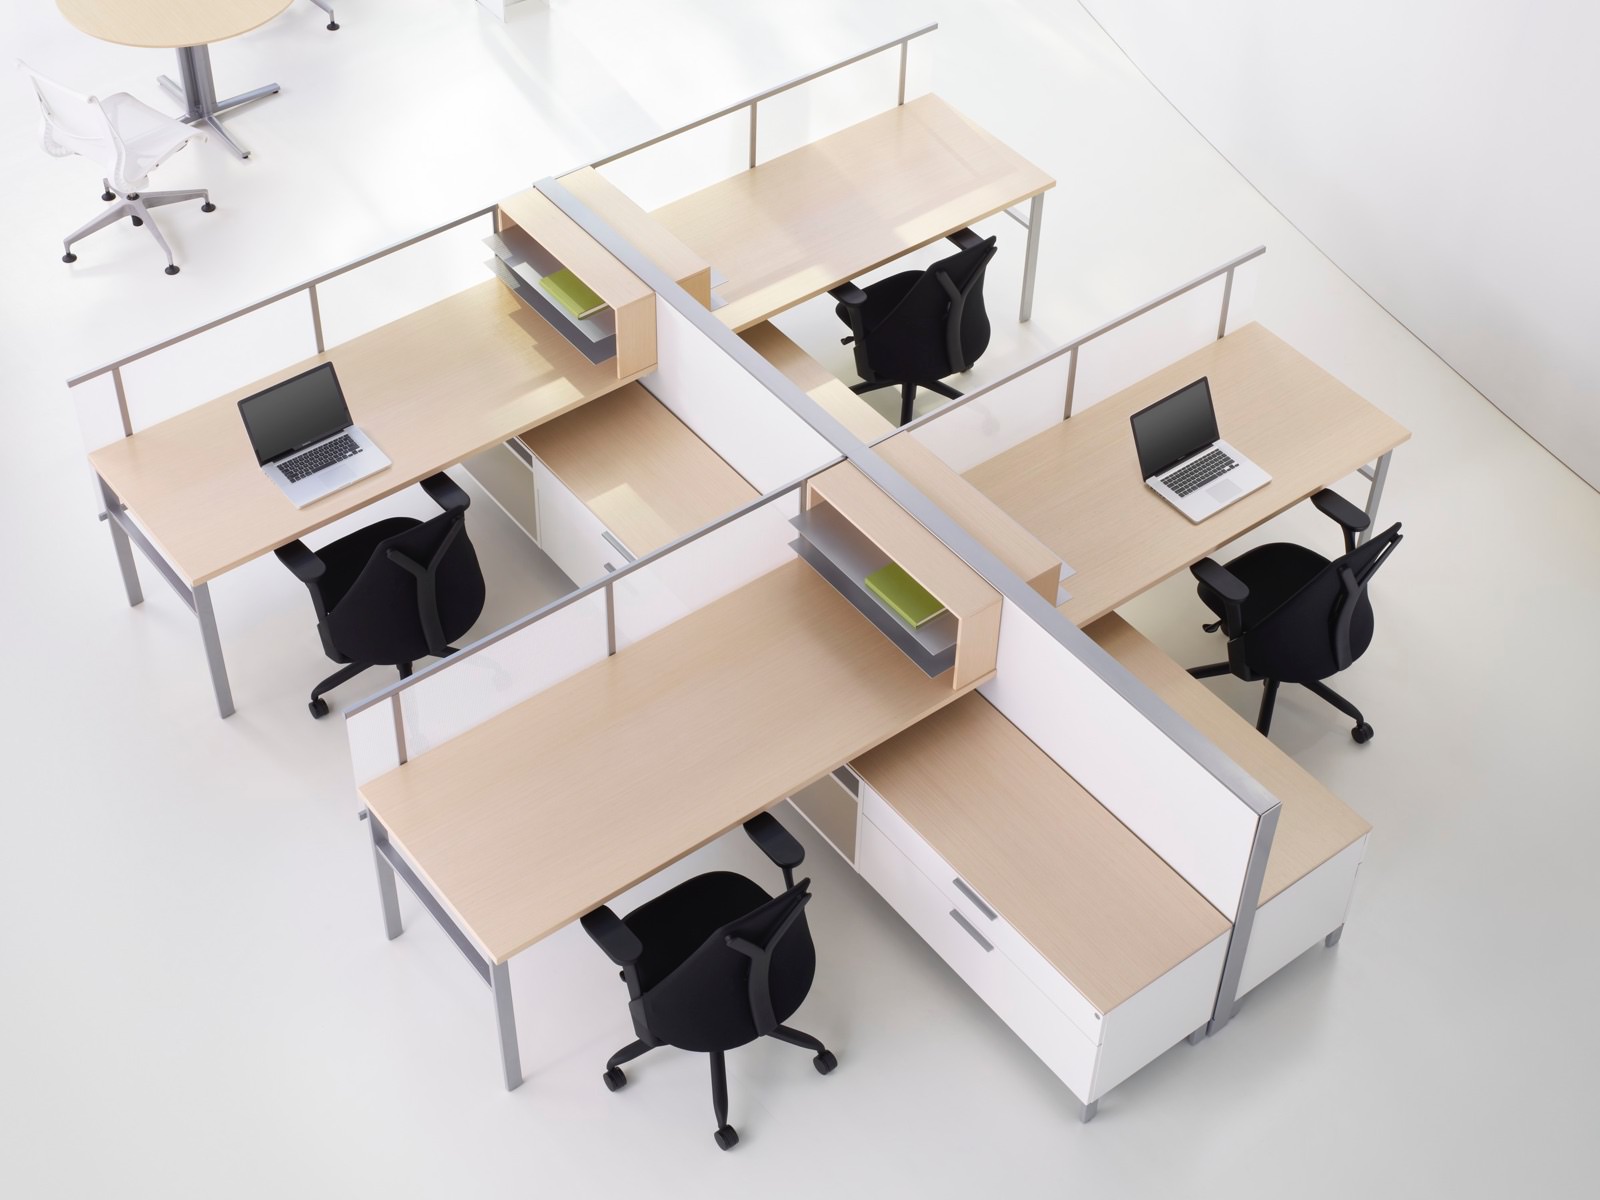 Overhead view of four workpoints with black Sayl office chairs and Canvas Storage surfaces in a light wood finish.